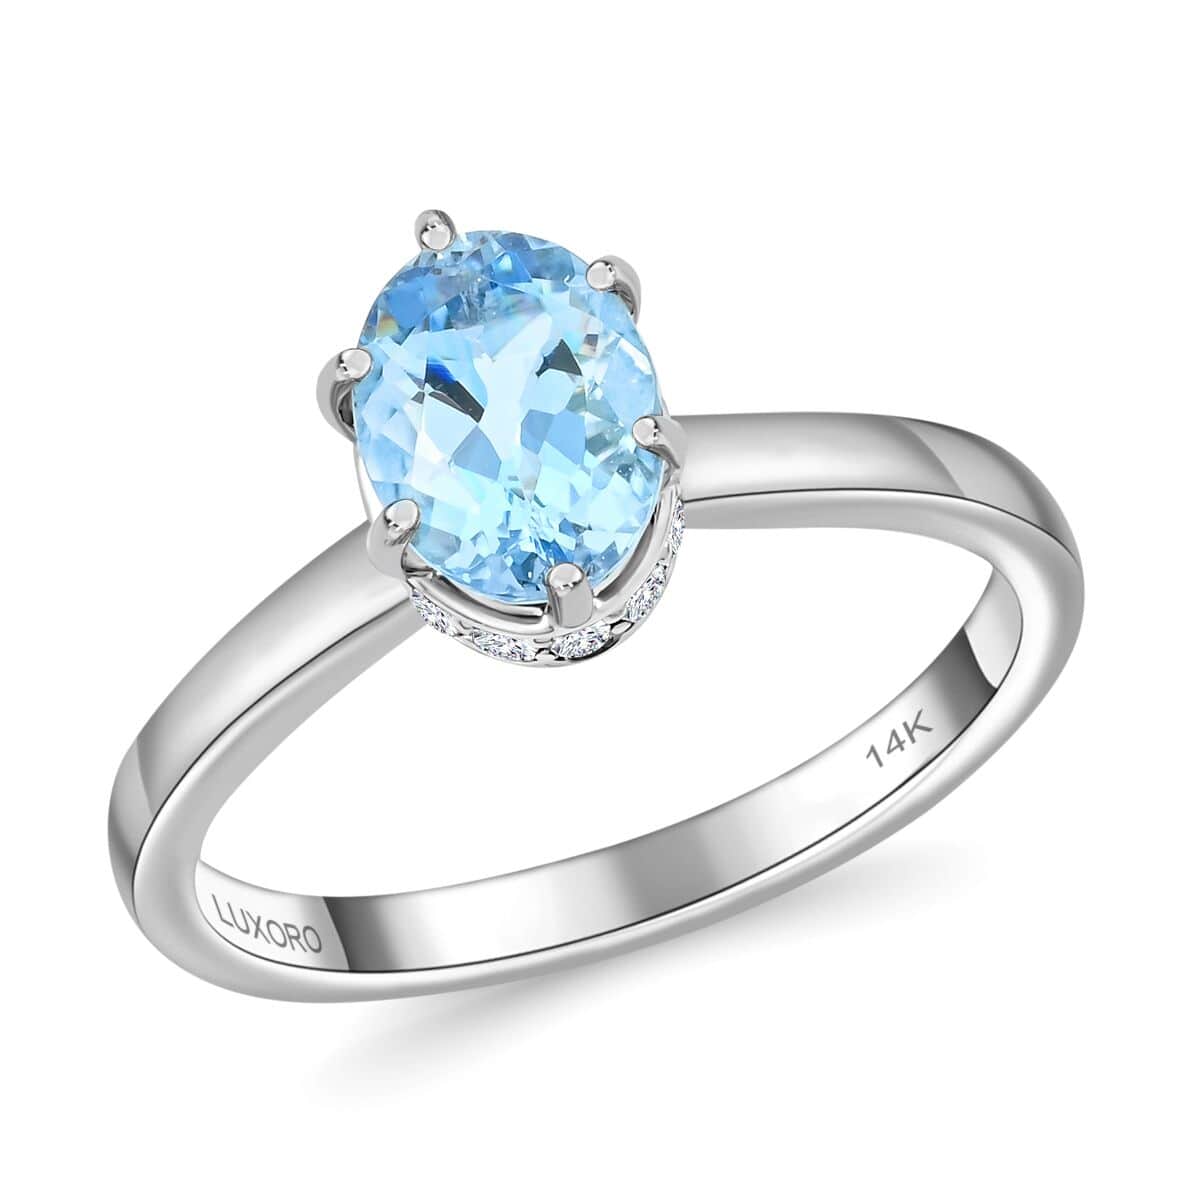 Certified & Appraised Luxoro 14K White Gold AAA Santa Maria Aquamarine and I2 Diamond Ring (Size 8.0) 1.25 ctw image number 0